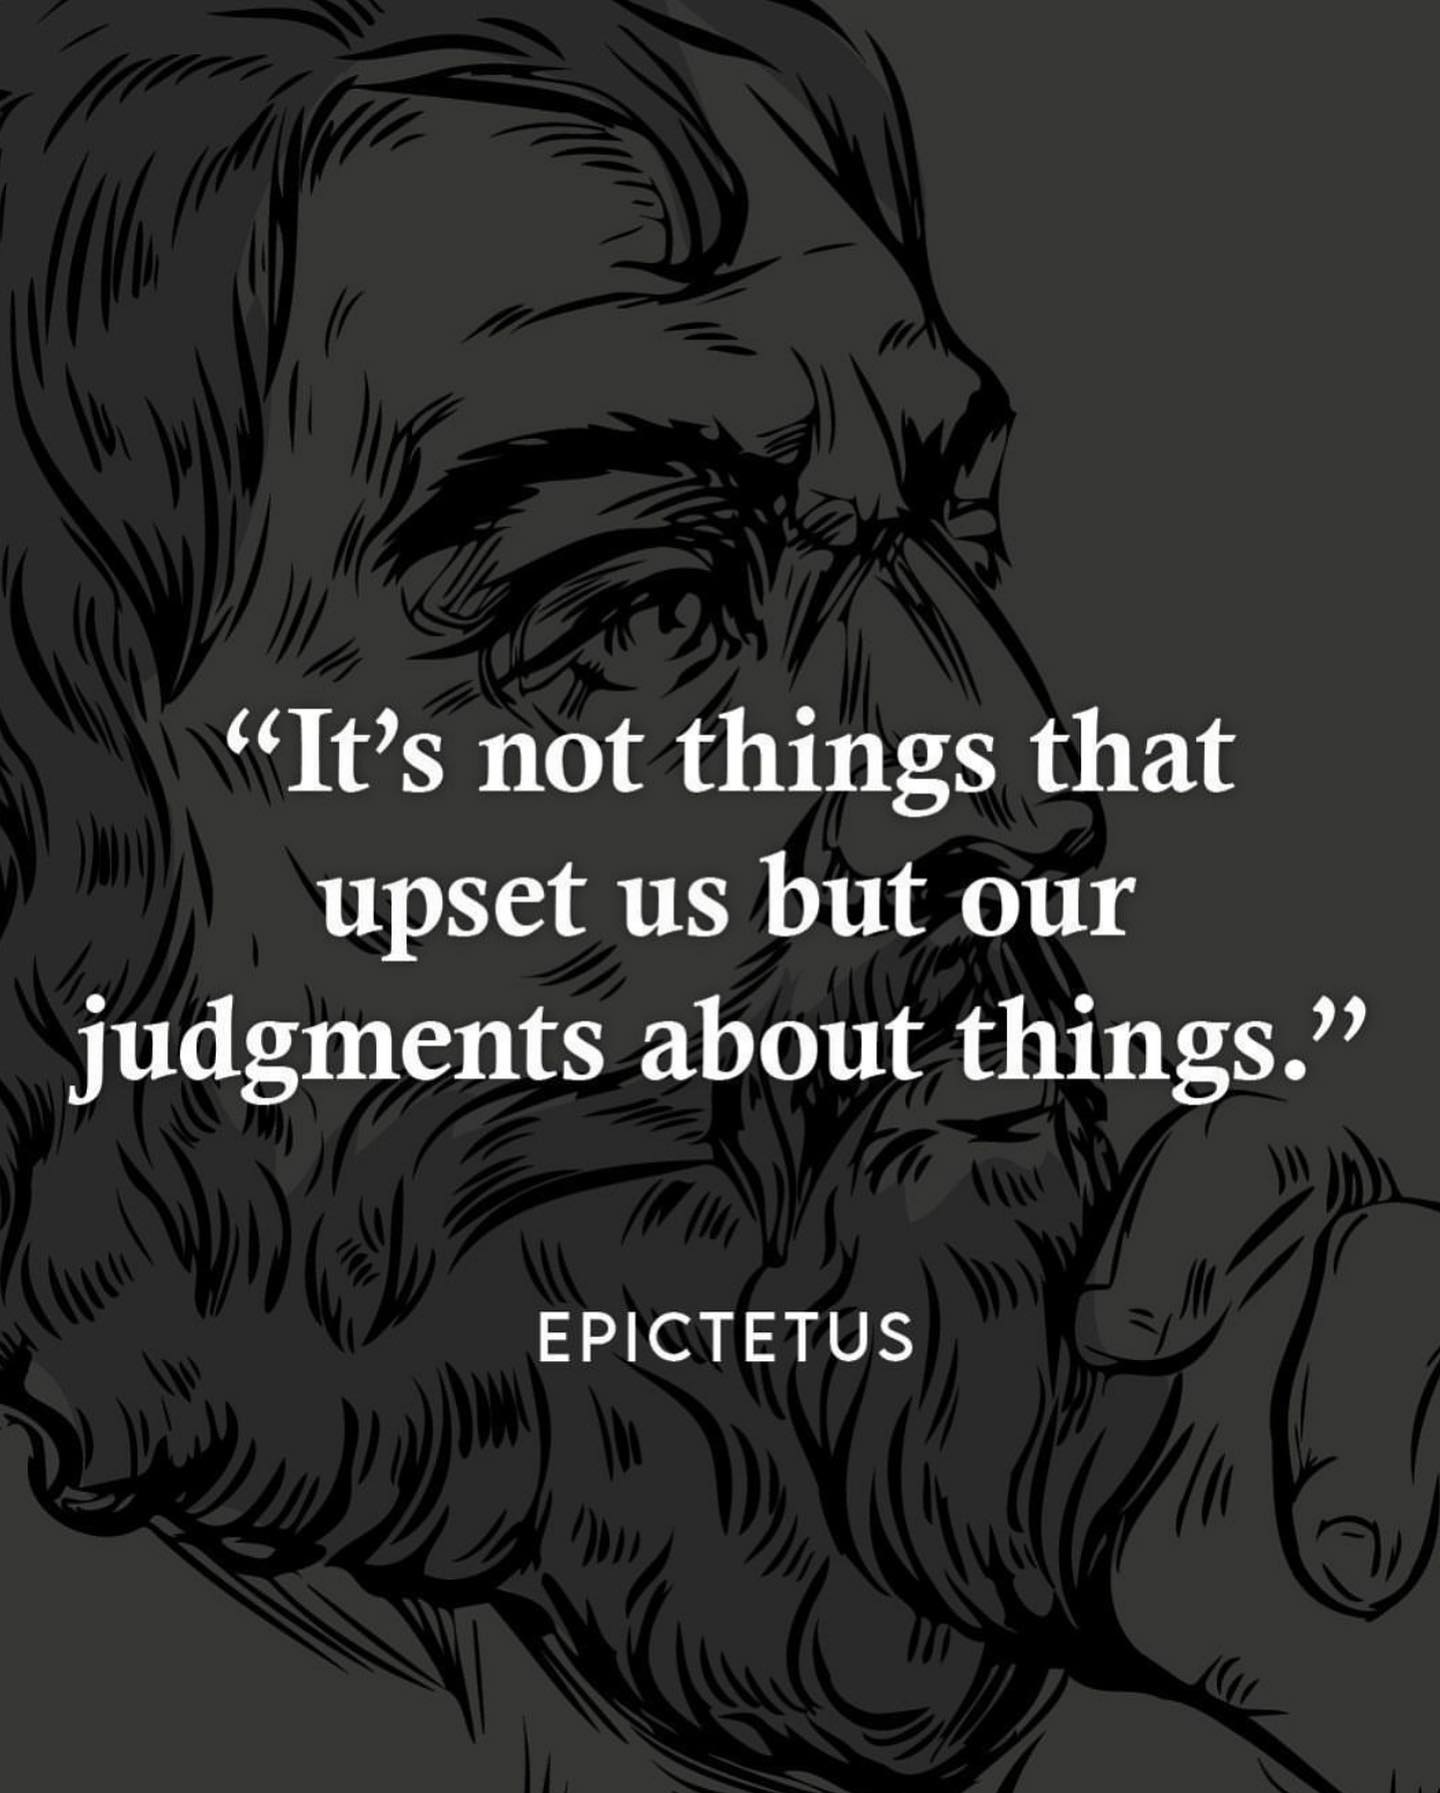 It’s not things that upset us but our judgments about things.